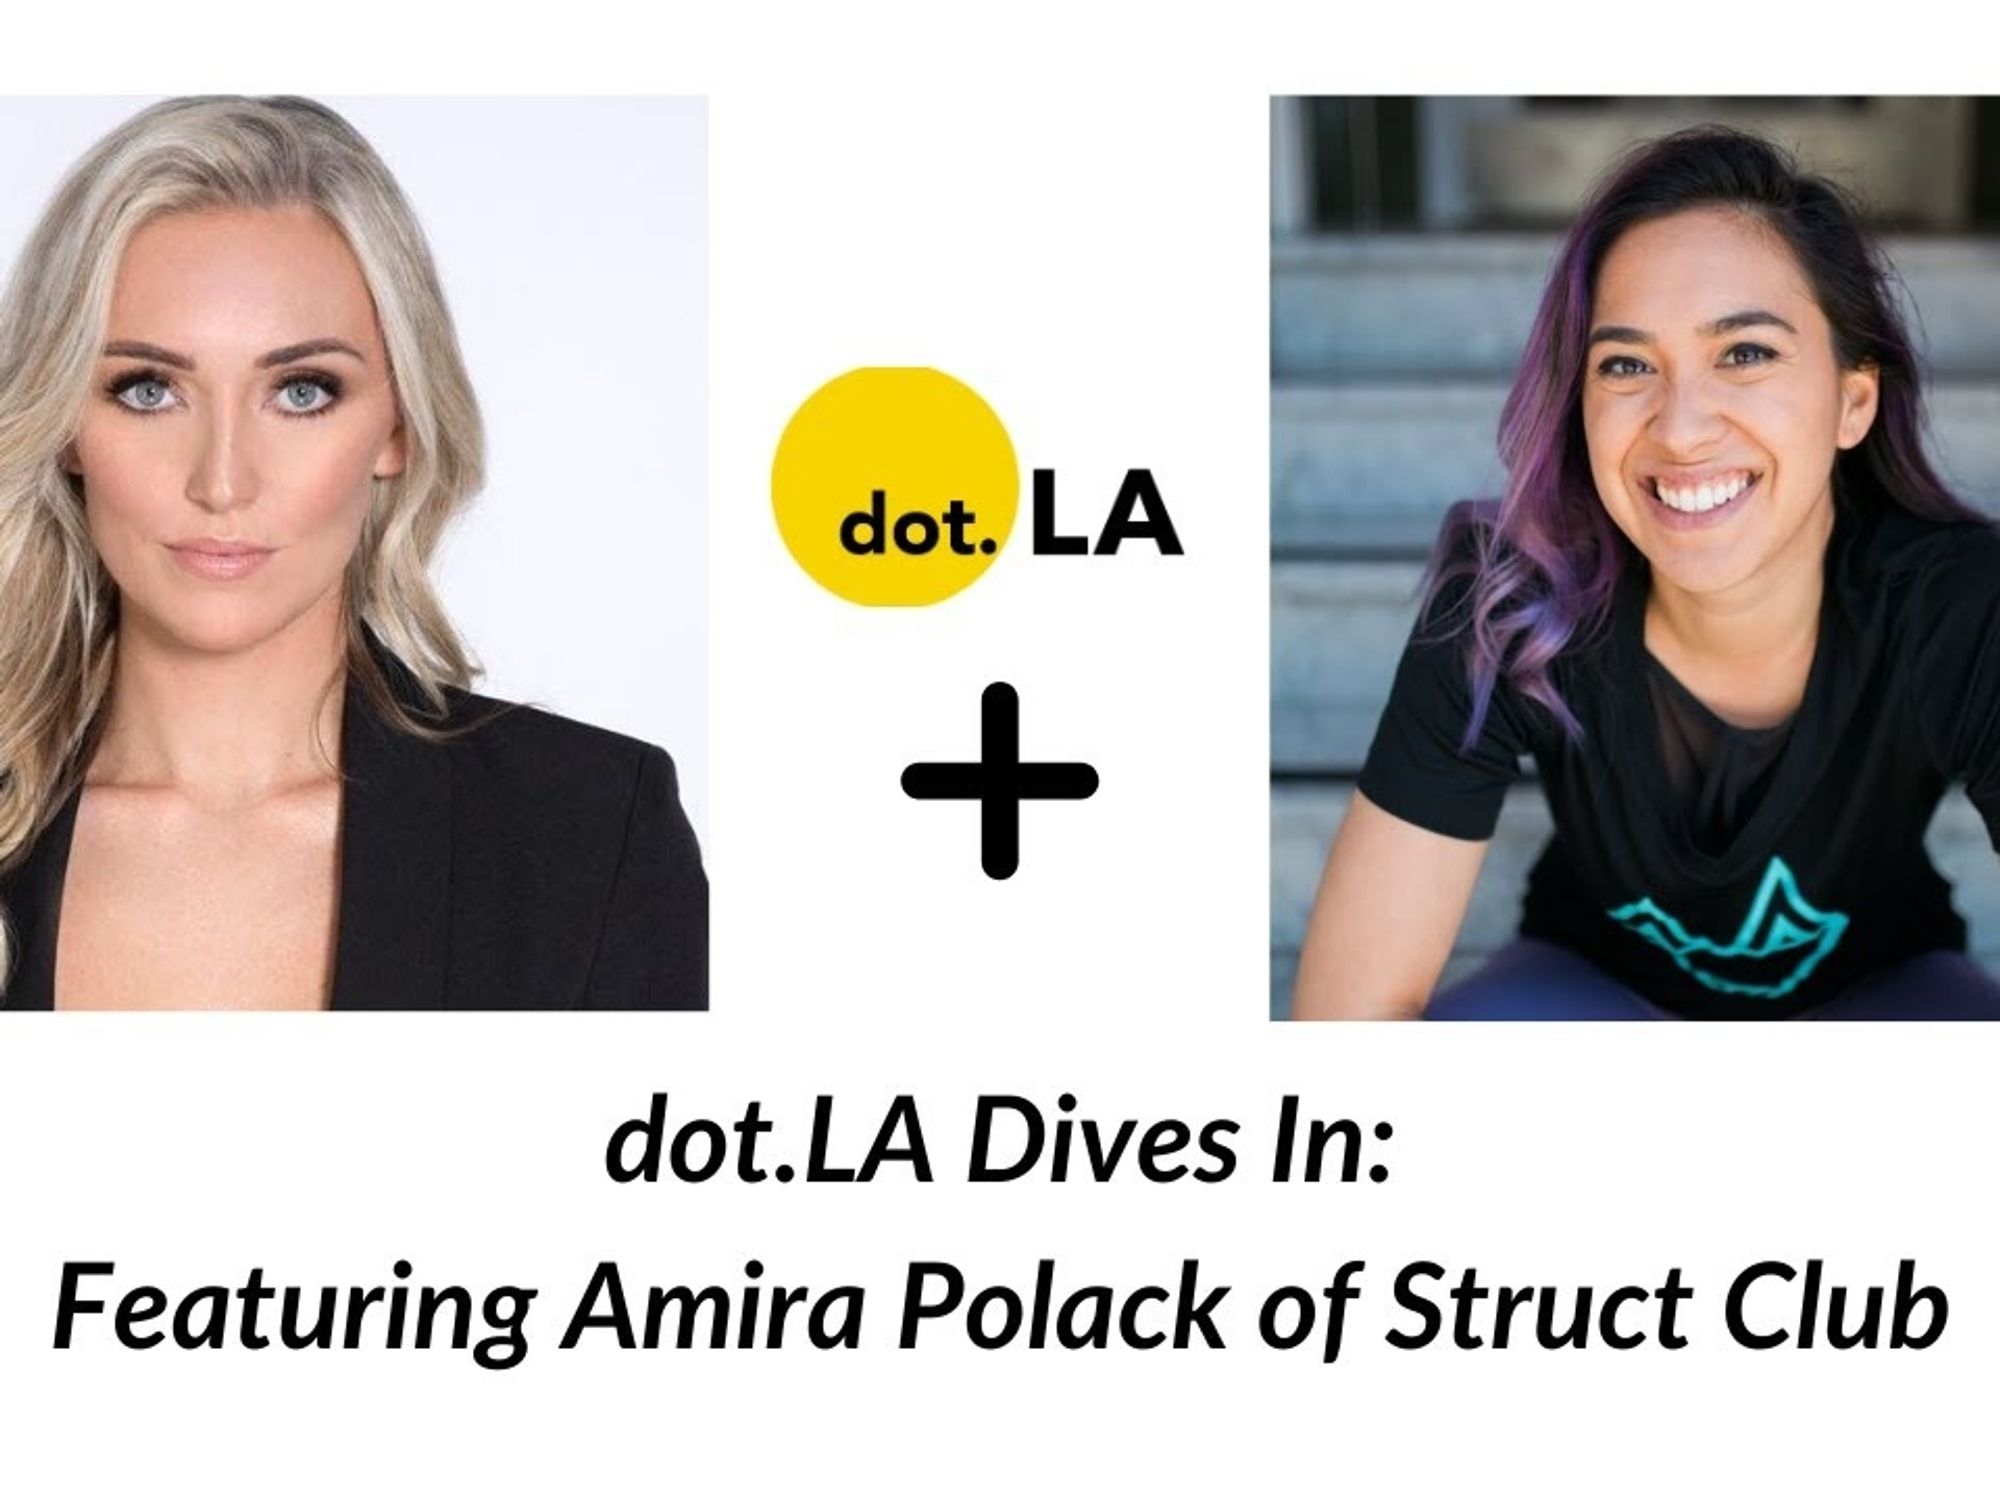 dot.LA Dives In: A Conversation with Amira Polack, Founder and CEO of Struct Club